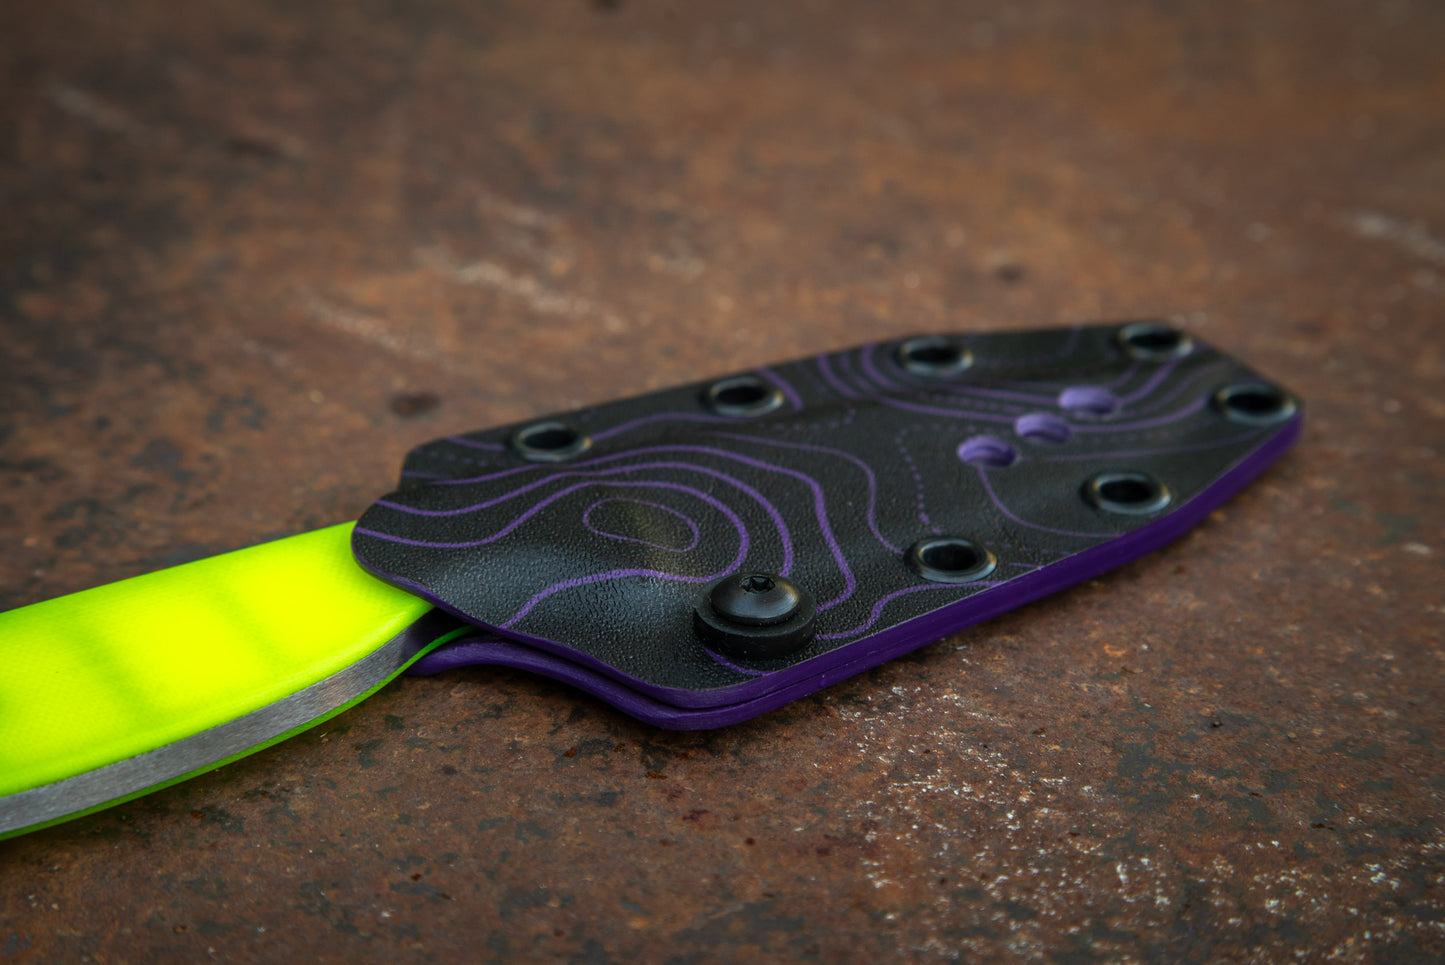 River Knife / Dayglow Yellow with Purple Topo Kydex Sheath